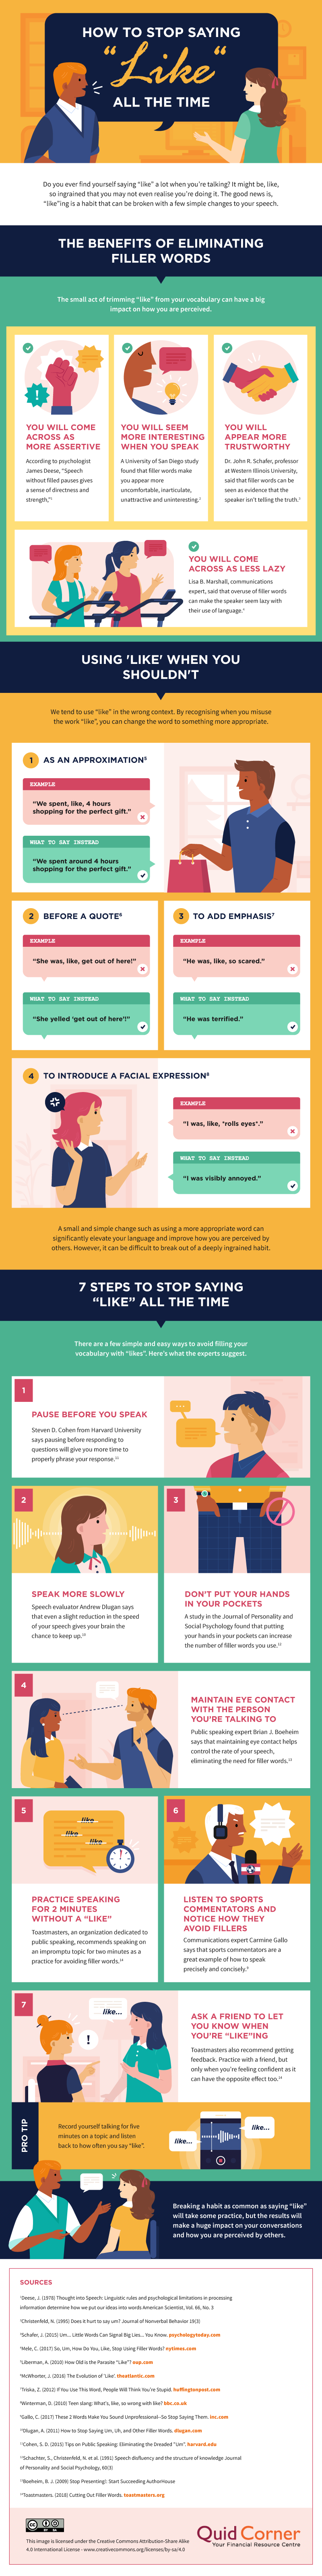 How to Stop Saying Like All the Time Infographic